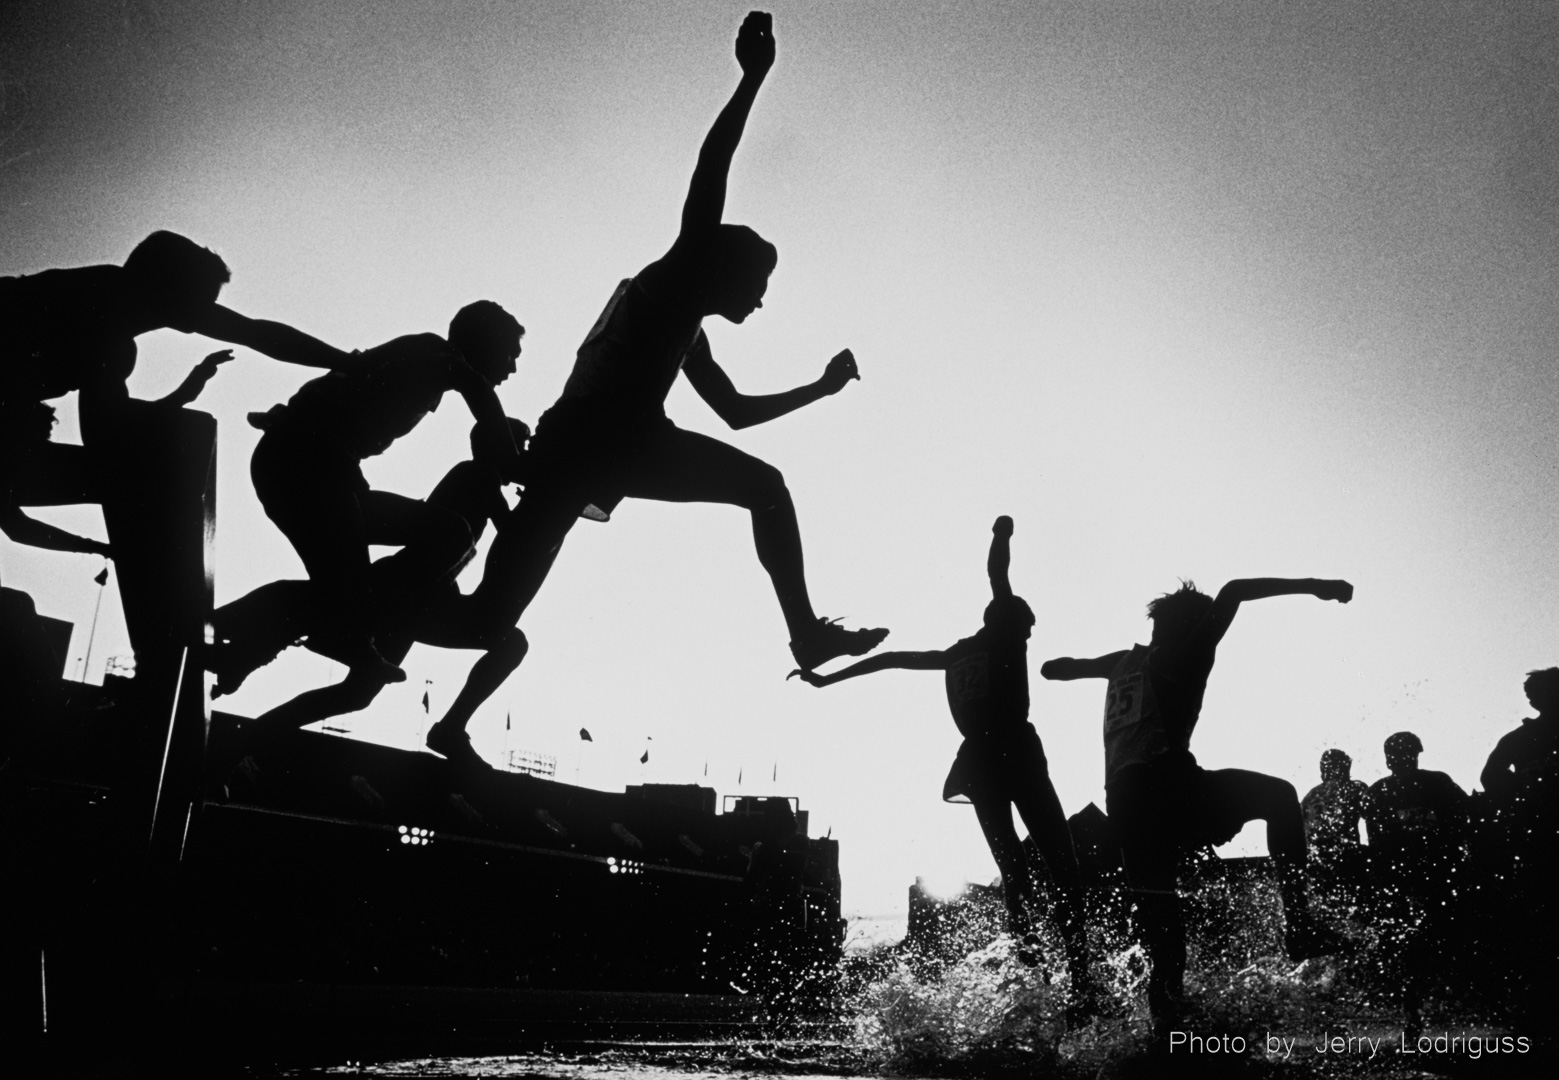 Runners clear the water hurdle during the Penn Relays Steeplechase event in 1992.